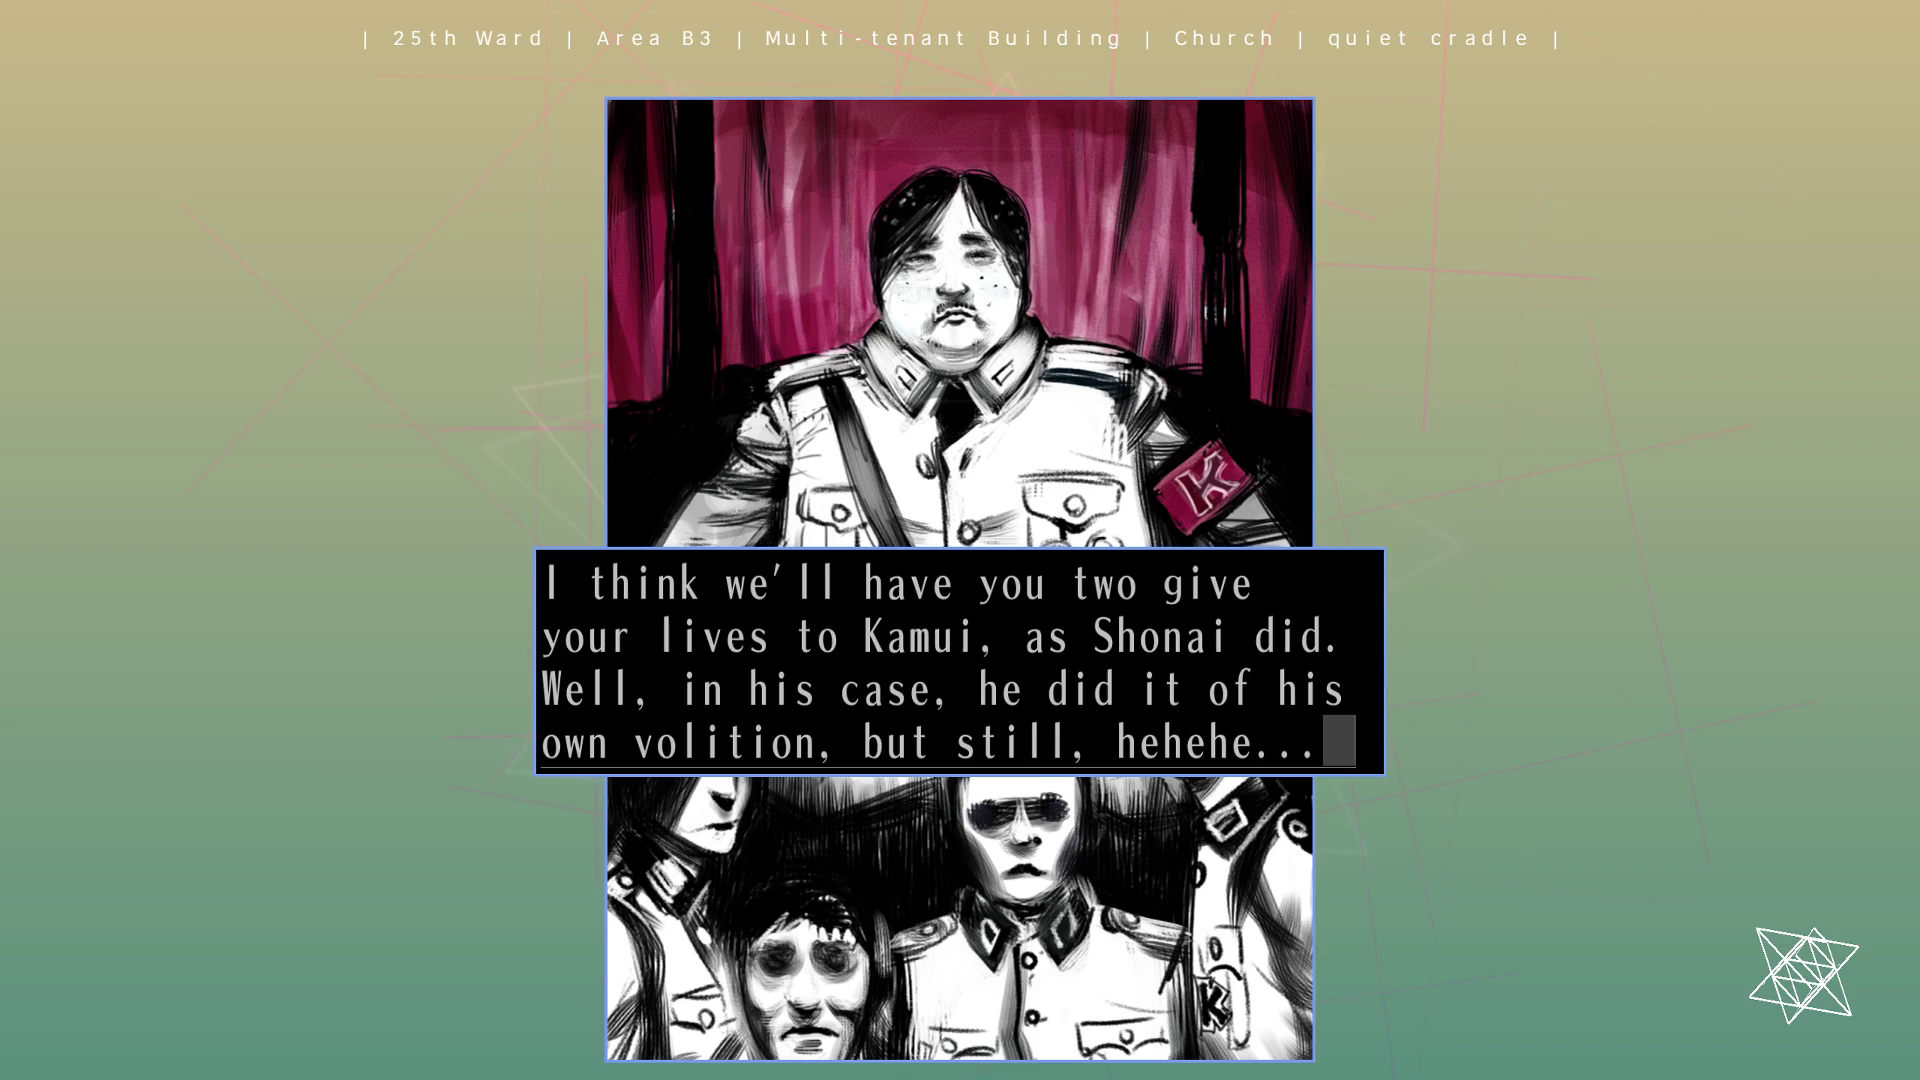 Screenshot from "quiet cradle." Engawa, a large man with a fat neck and a Hitler-like haircut, wears a Nazi-like uniform, the armband bearing the letter K instead of a swastika. Four minions with shadowy, abstracted faces stand below him in similar uniforms, one of them wearing an iron K in place of an iron cross. Engawa says, "I think we'll have you two give your lives to Kamui, as Shonai did. Well, in his case, he did it of his own volition, but still, hehehe..."